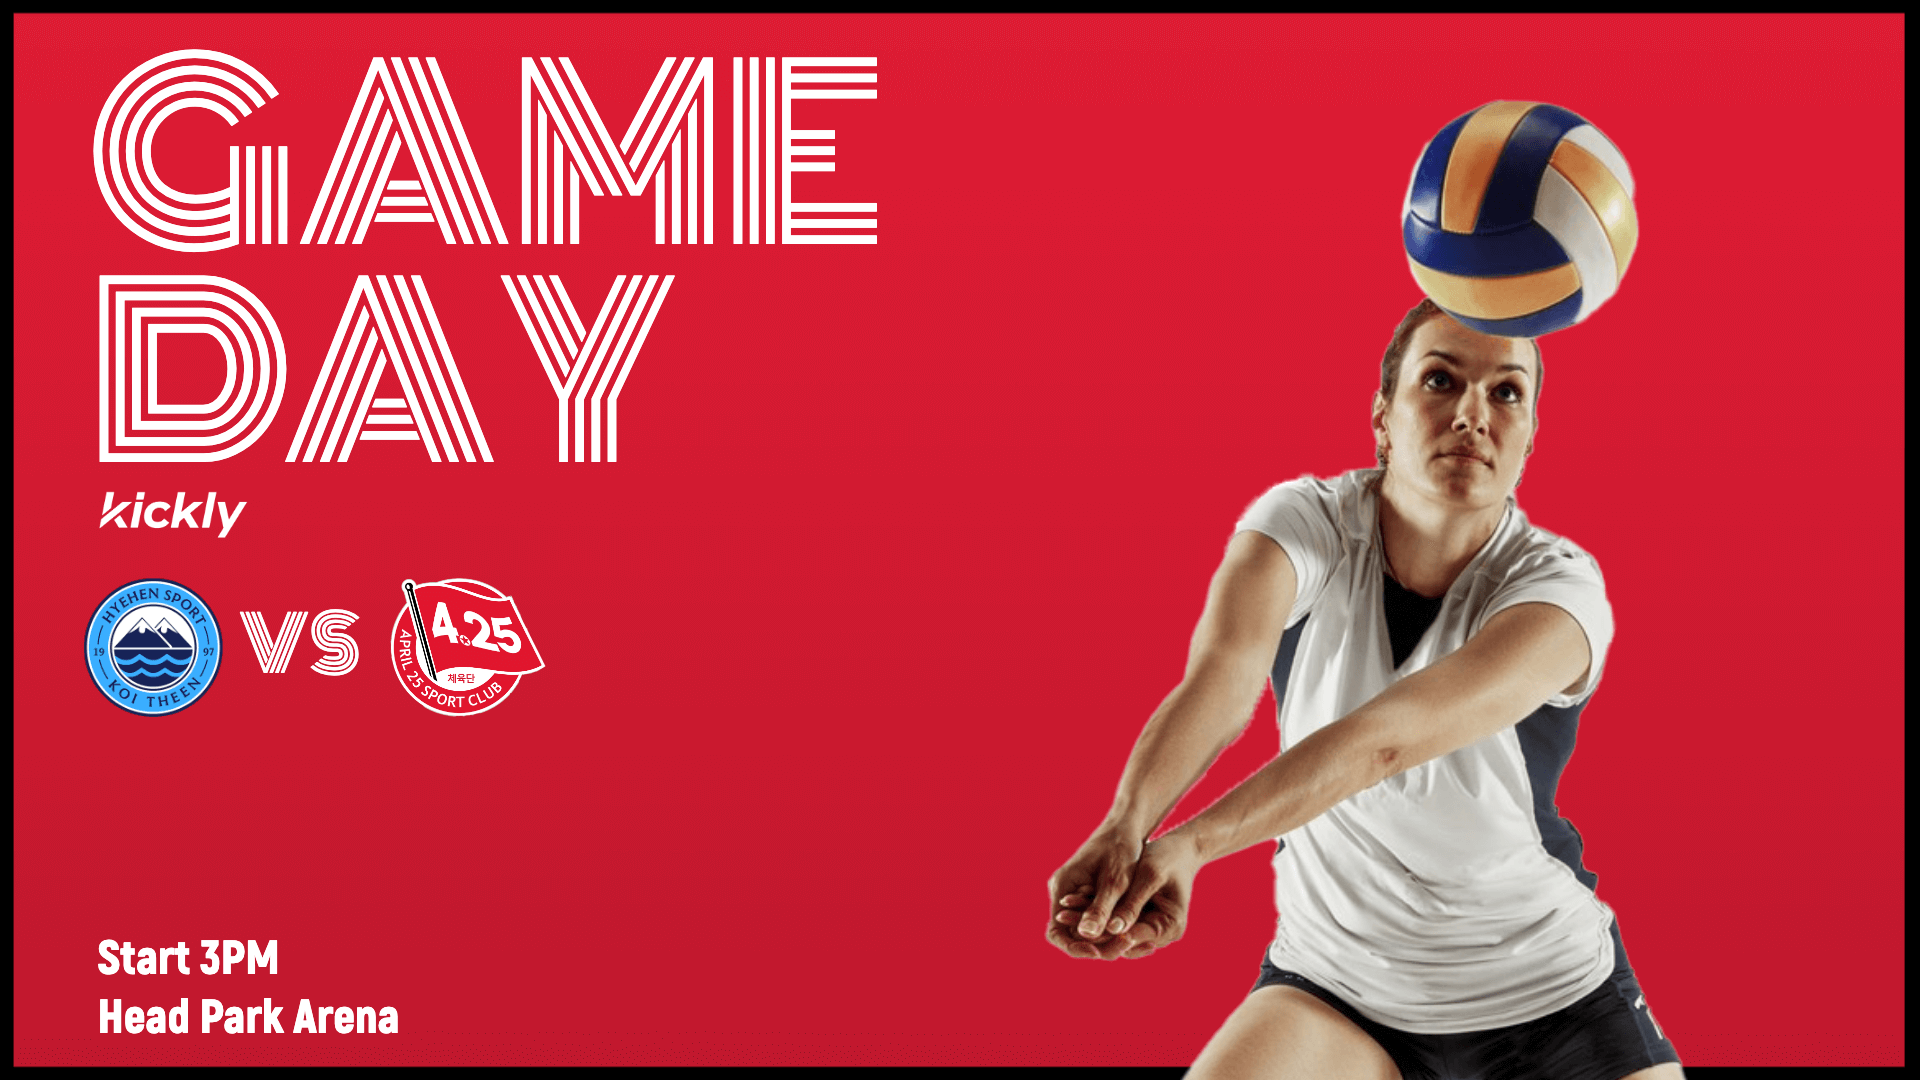 Volleyball Gameday Editable Template L